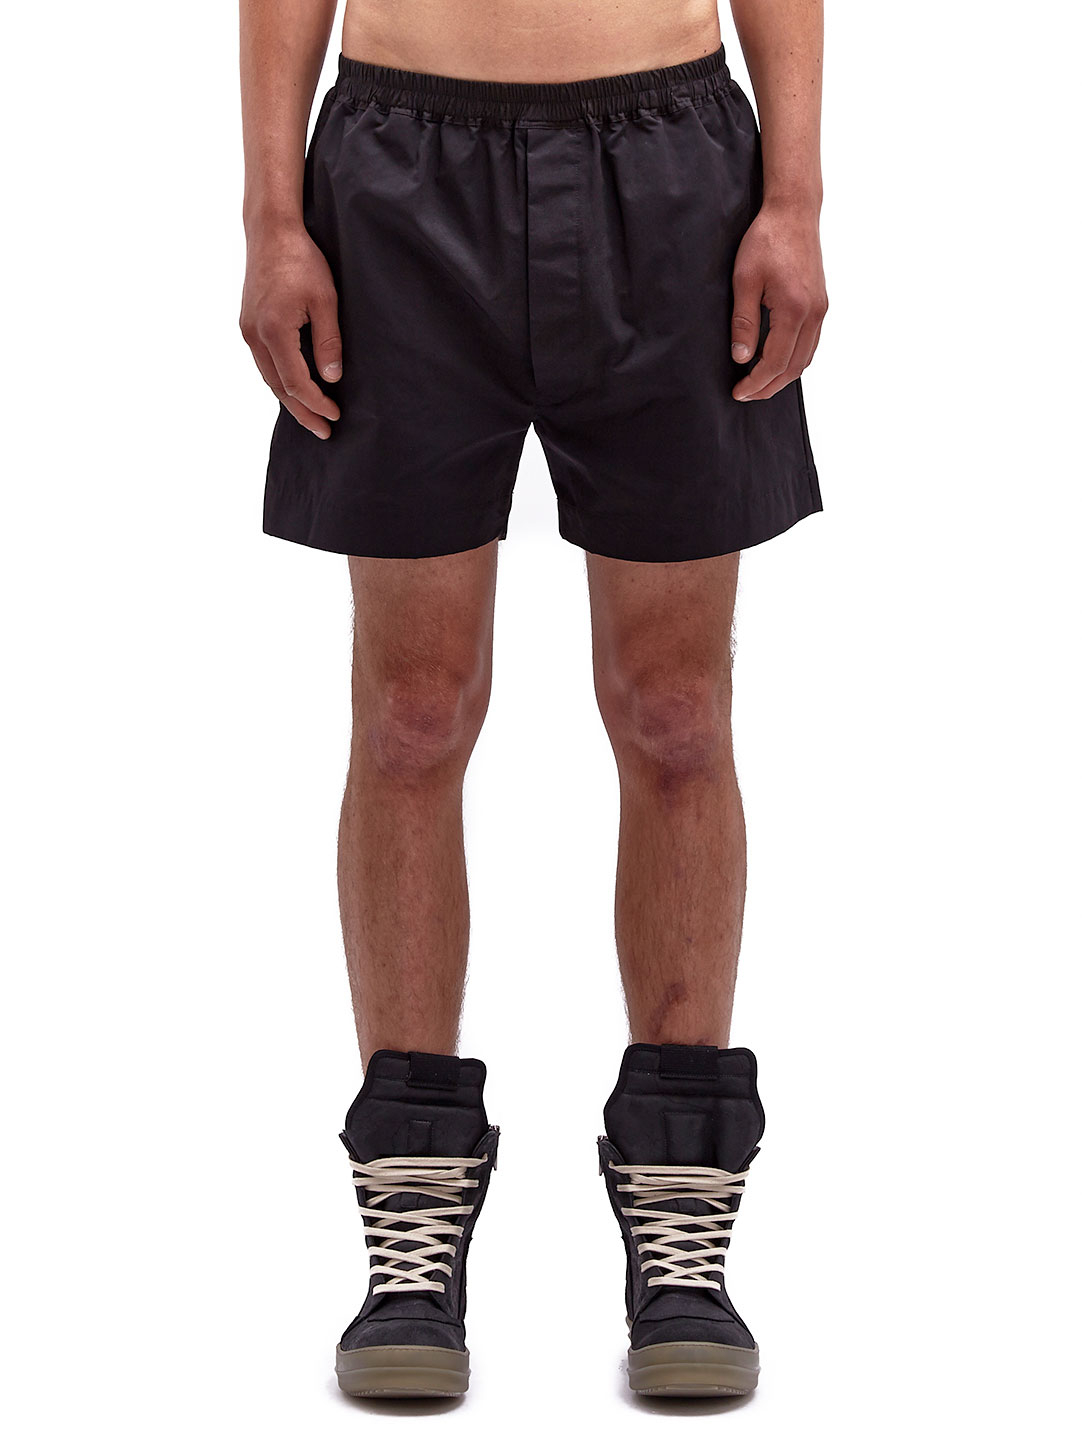 Lyst - Rick Owens Mens Boxer Woven Shorts in Black for Men